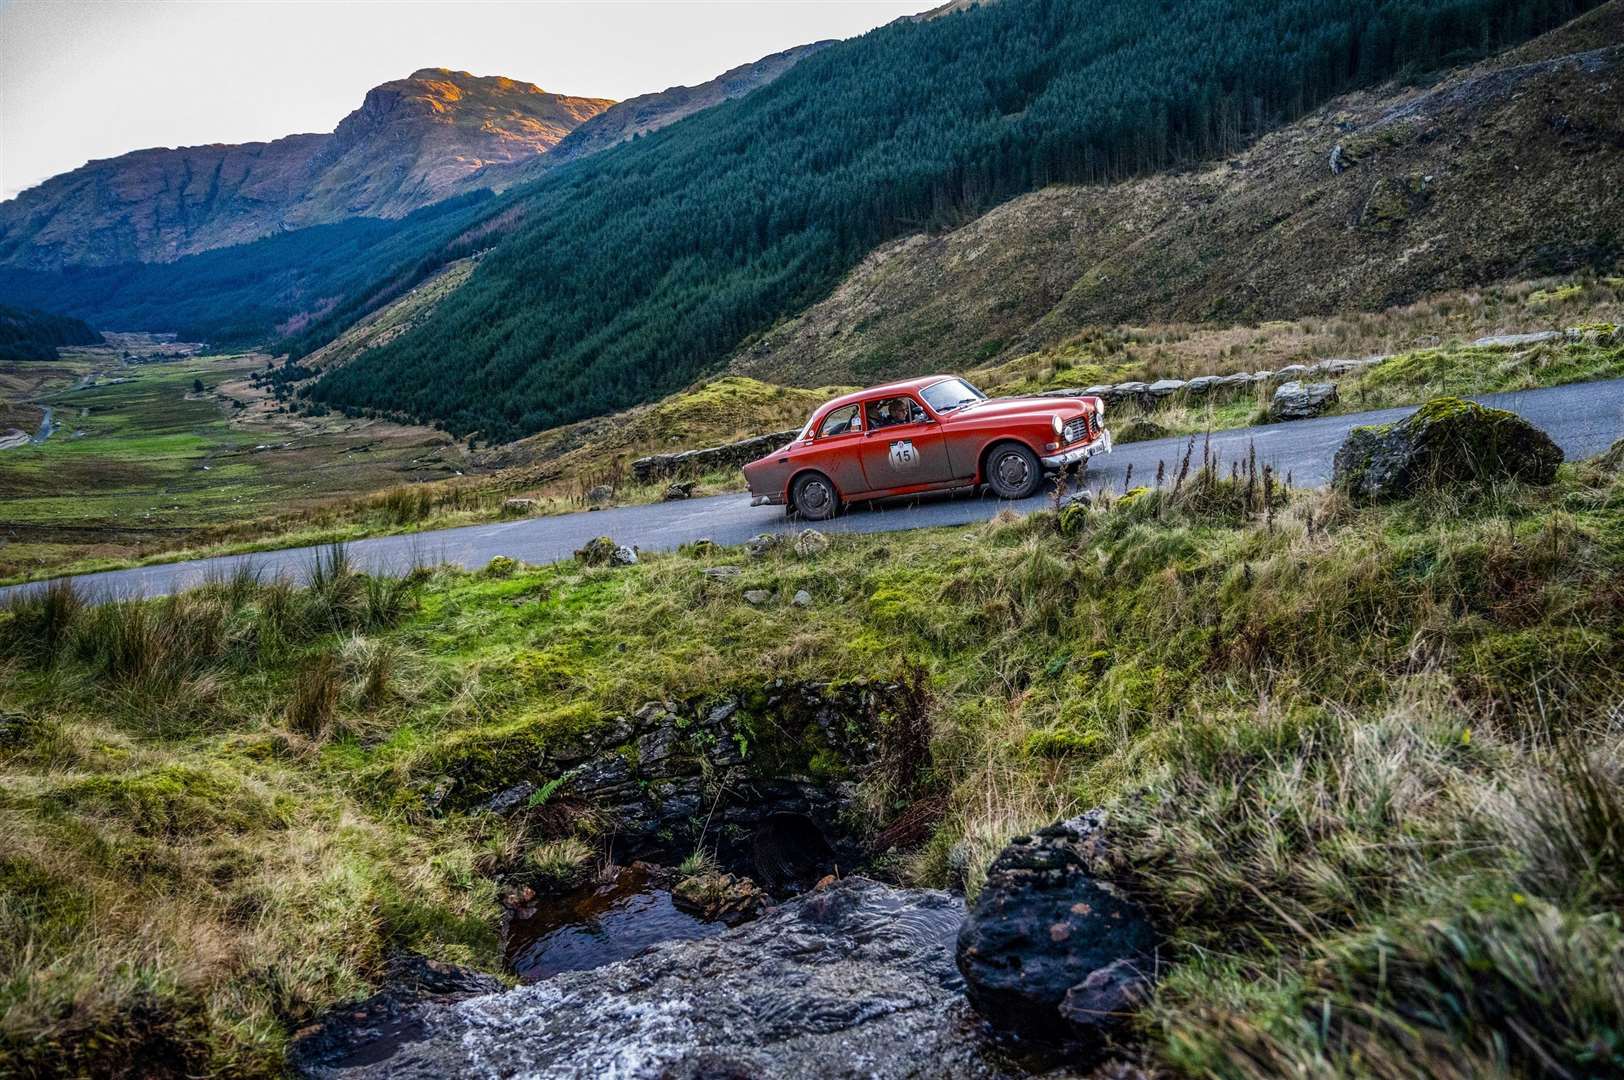 The cars travelled through some of the most beautiful parts of the country on their Lejog trip. Picture: Francesco & Roberta Rastrelli/Blue passion Photo.